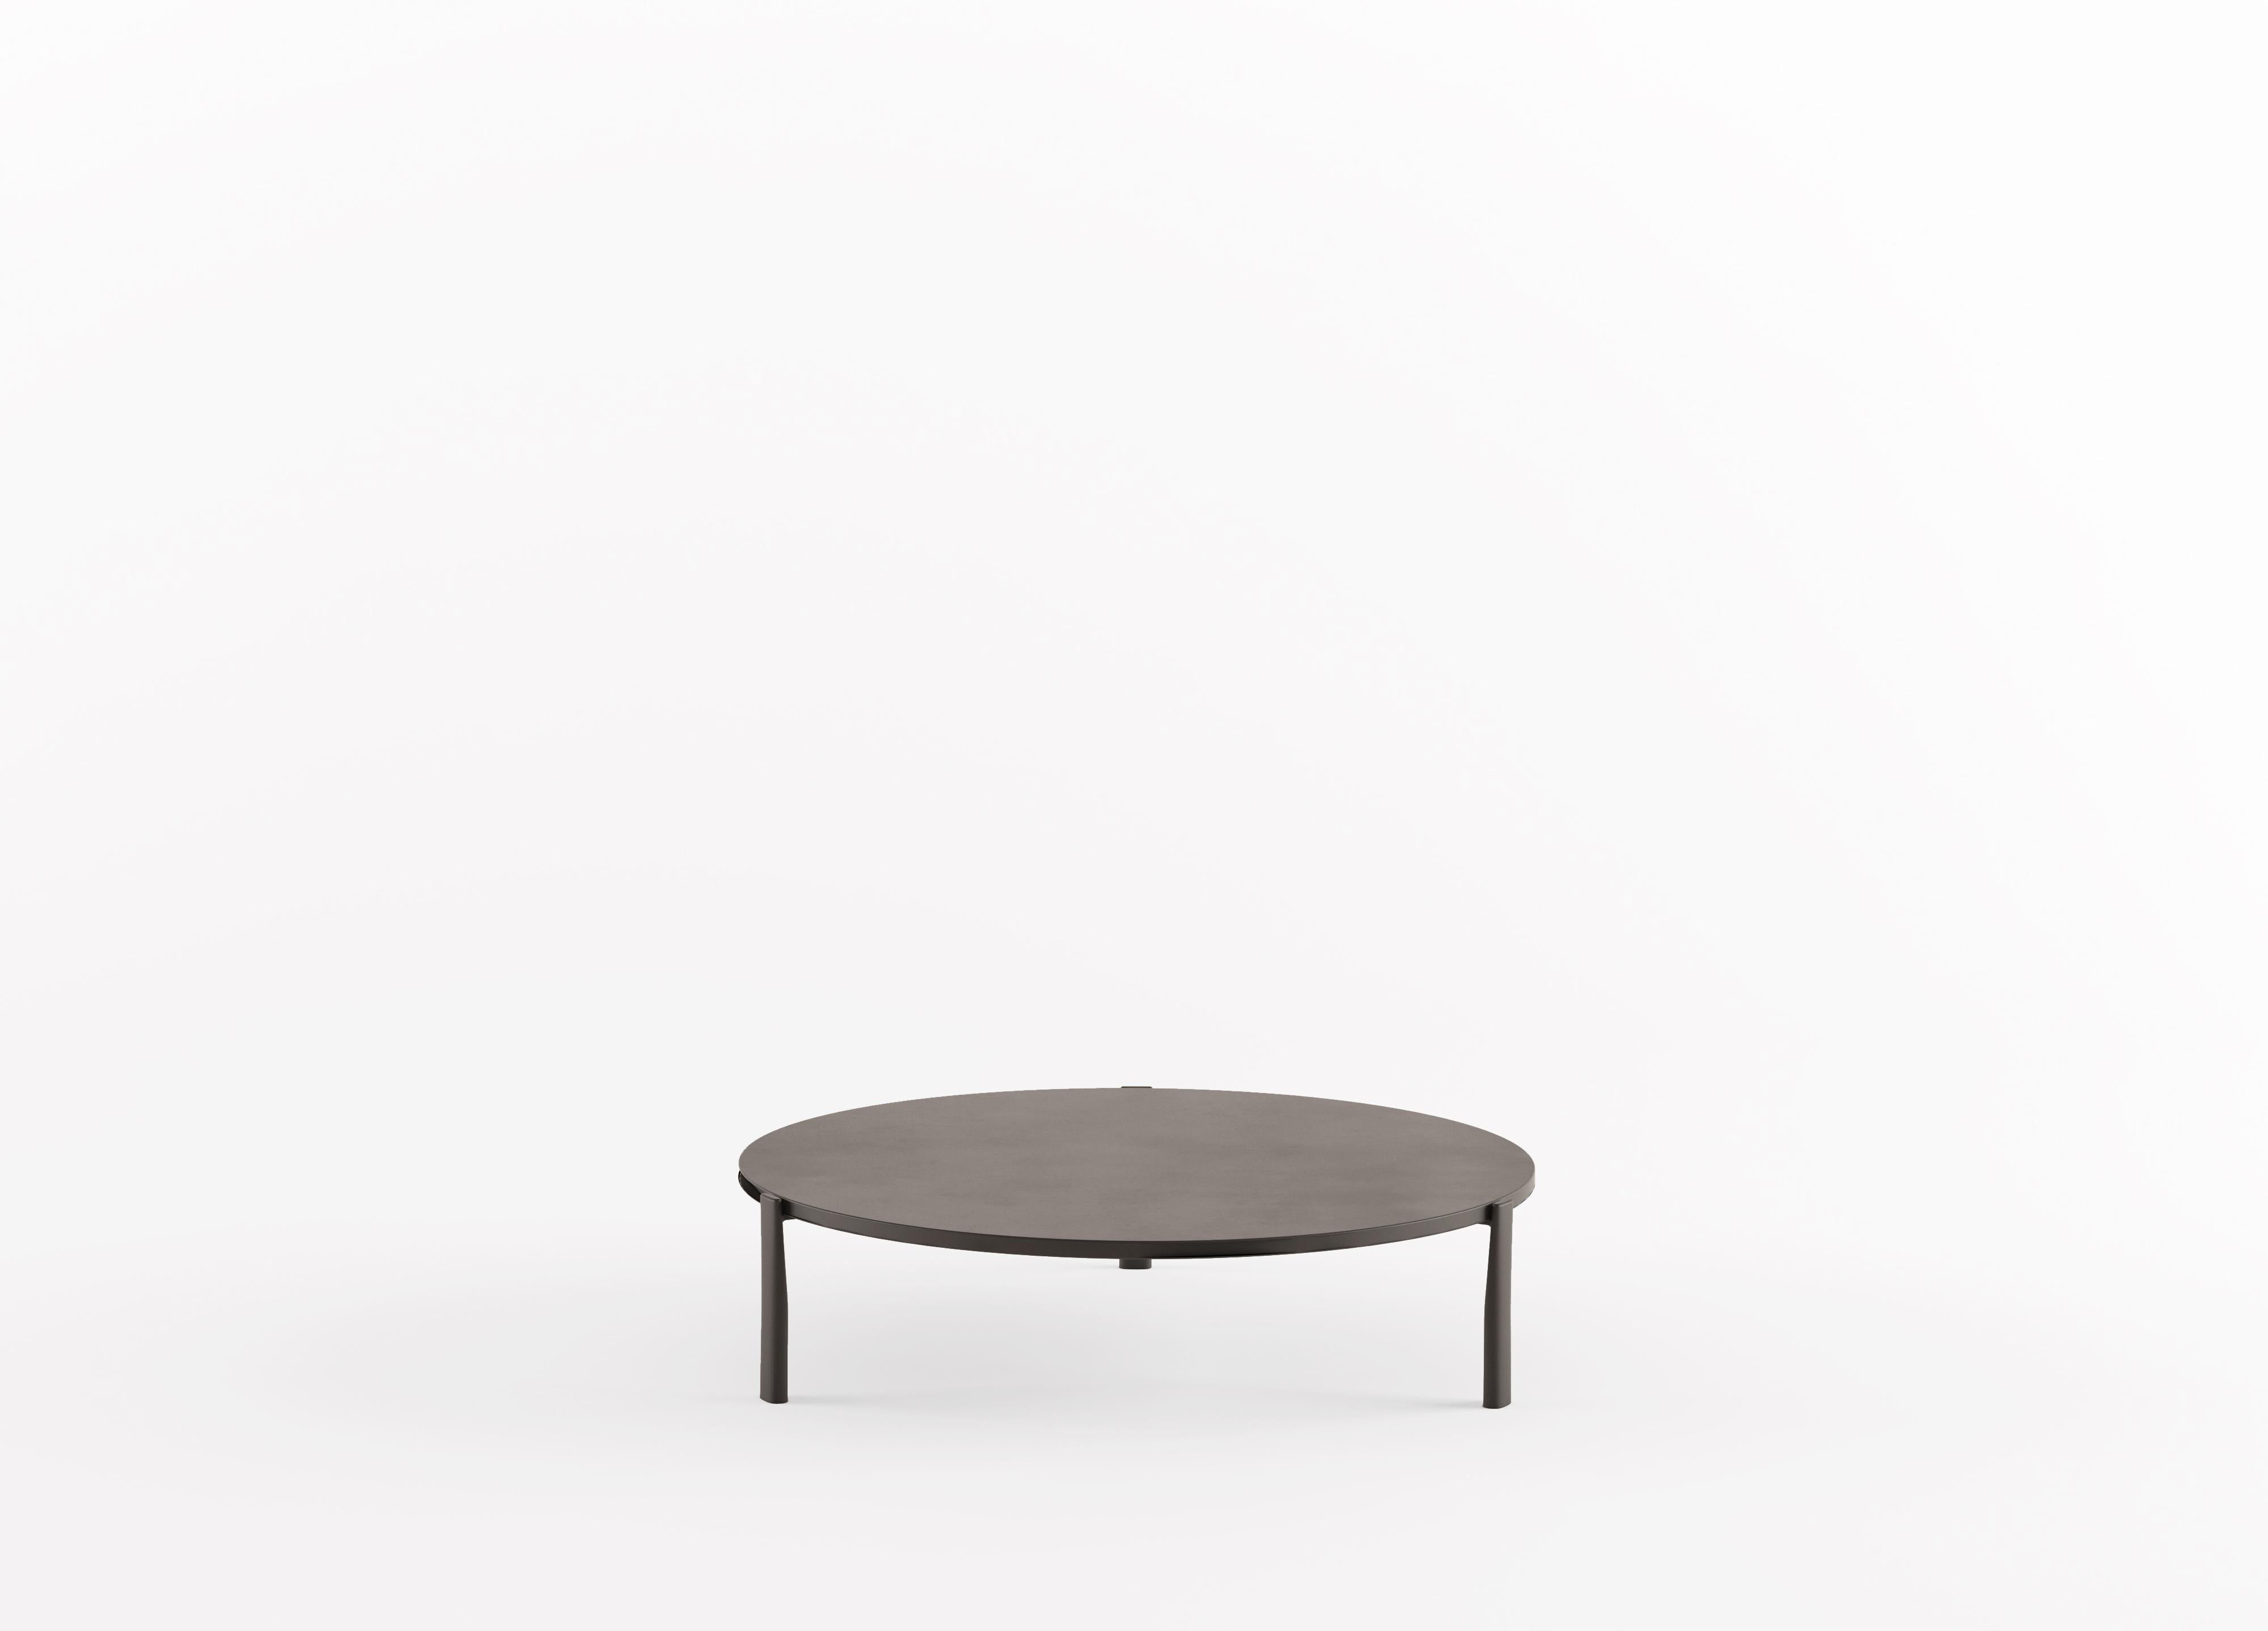 Alias 955 Eleven Low Table Singular Round w Grey Color MDF & Lacquered Frame by PearsonLloyd

Coffee table with round or rectangular lacquered MDF top; structure composed of lacquered or polished aluminium legs.

Tom Lloyd and Luke Pearson